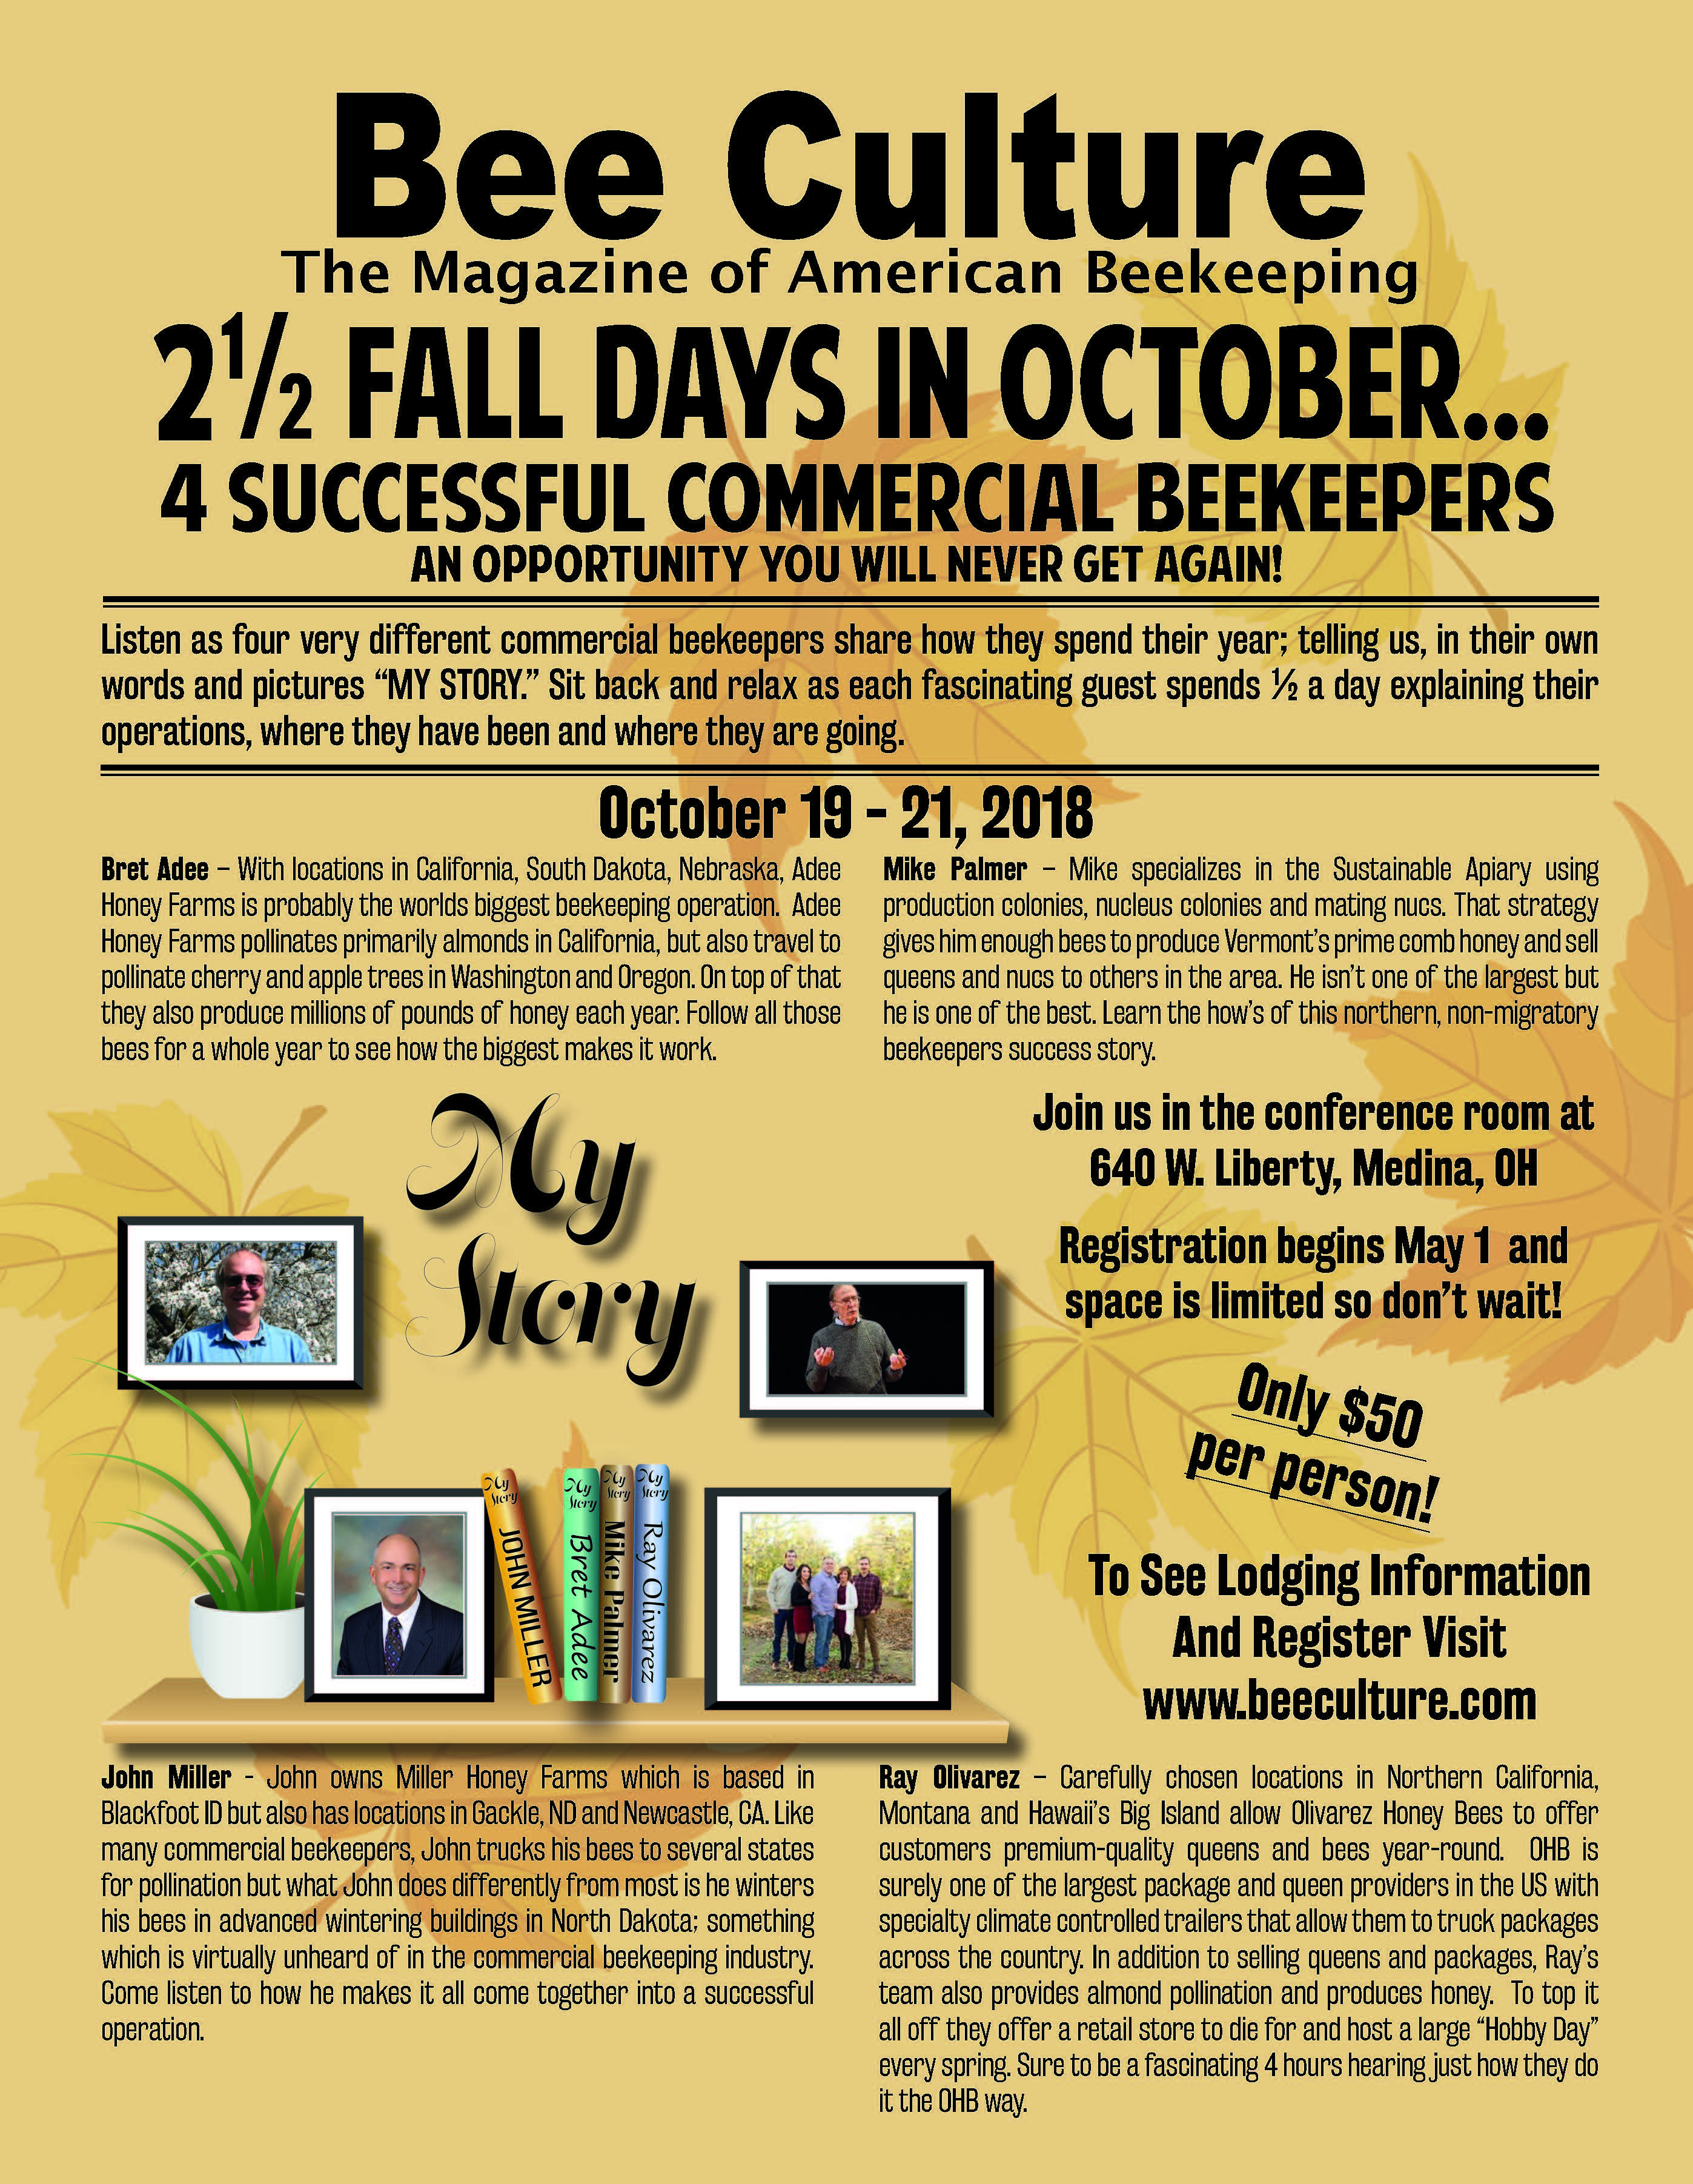 CATCH THE BUZZ – Bee Culture’s Fall Event – “My Story”